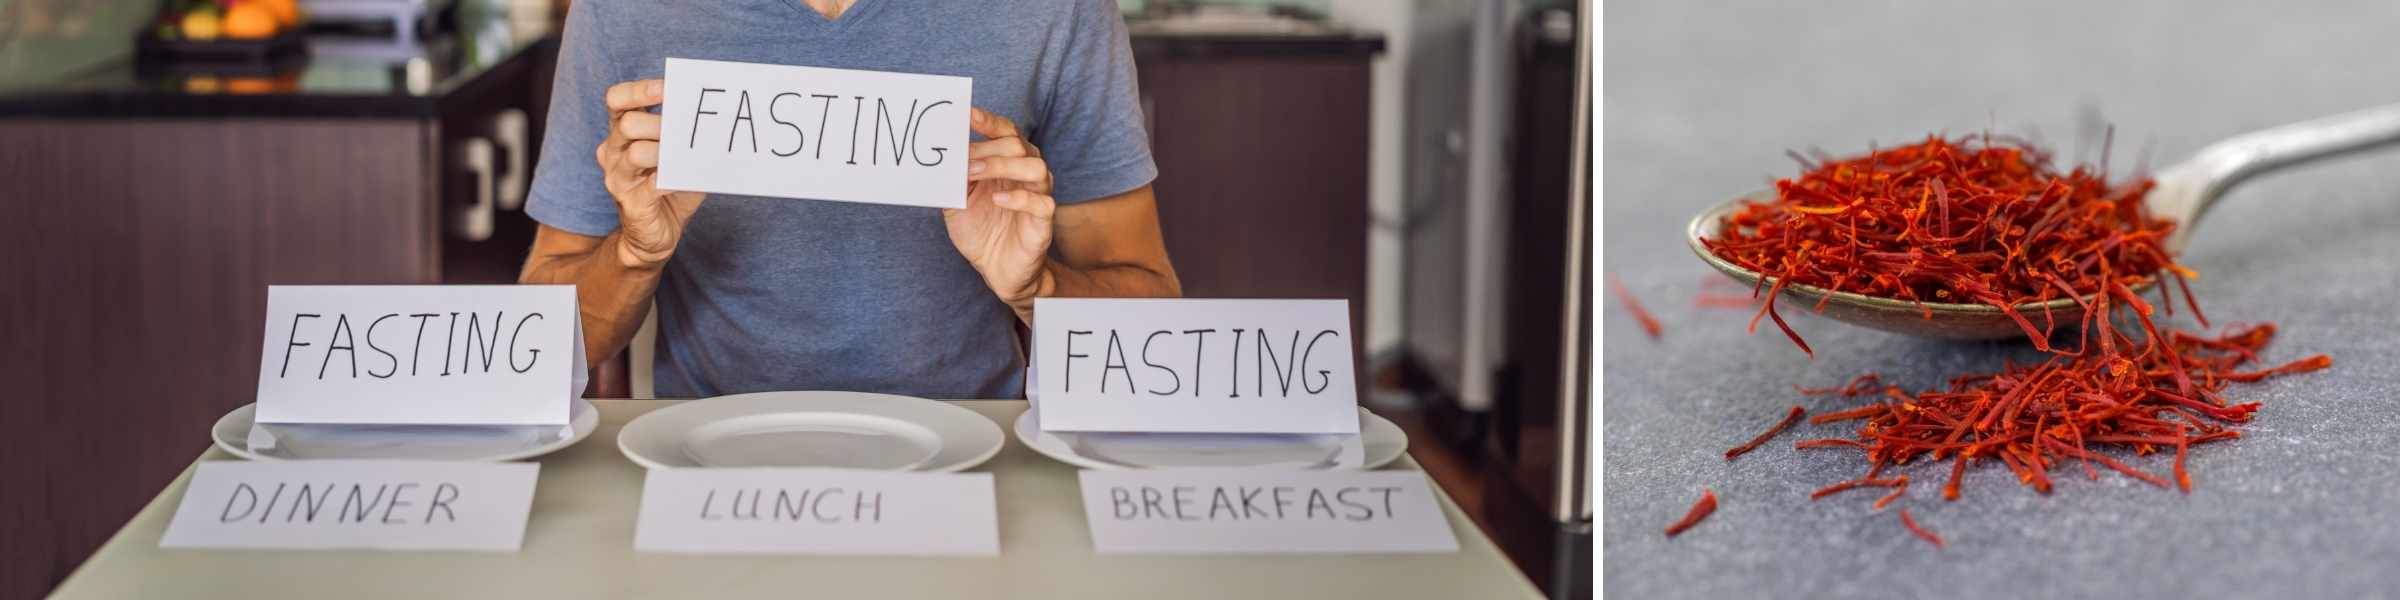 Saffron: A Powerful Aid for Intermittent Fasting